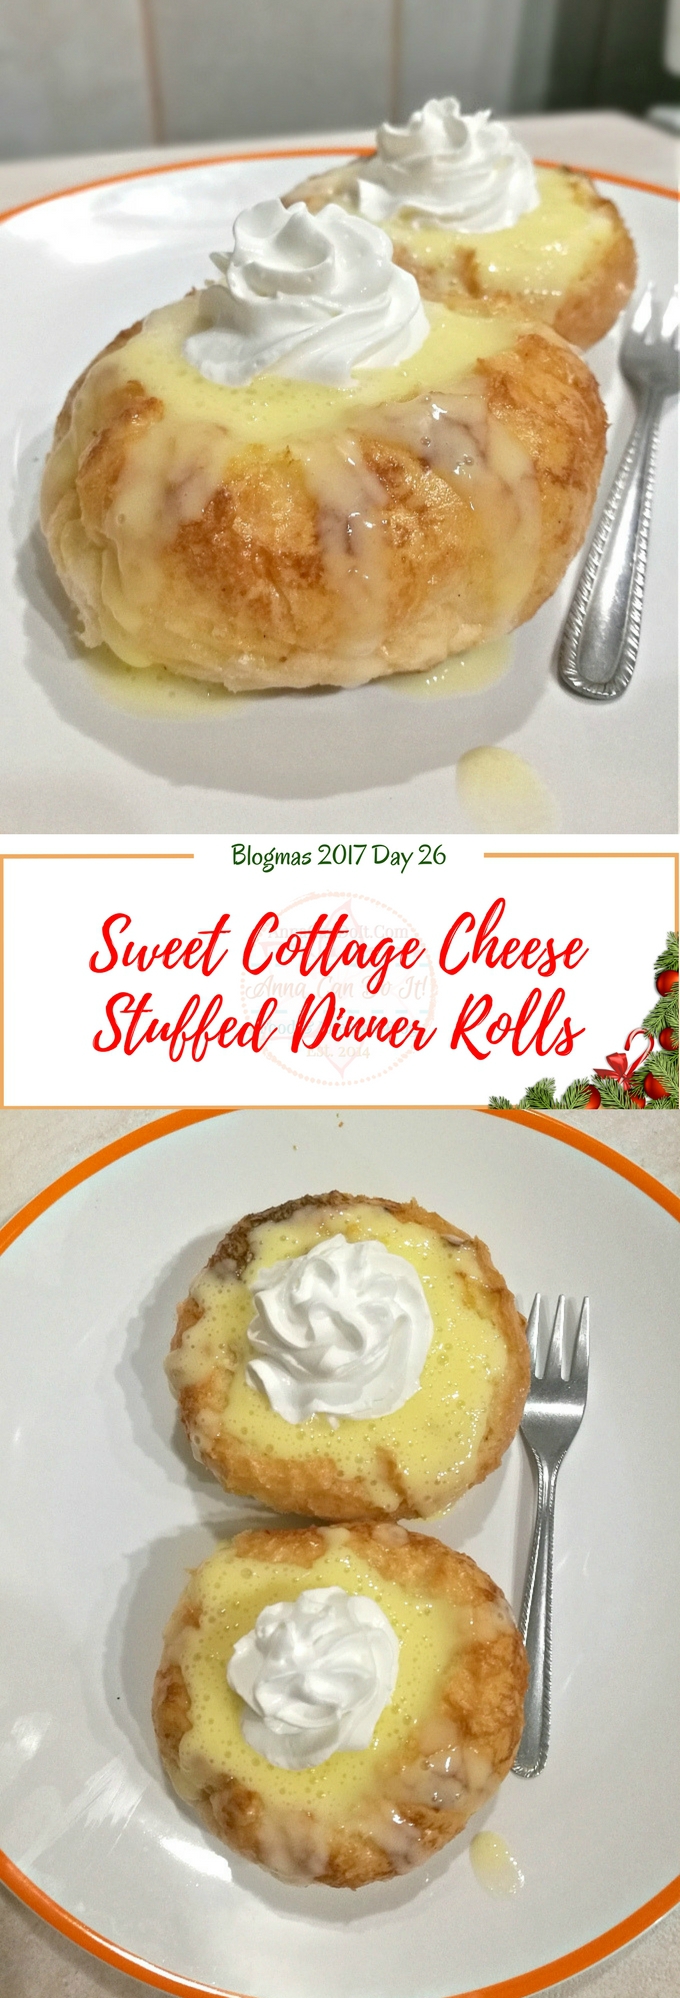 Sweet Cottage Cheese Stuffed Dinner Rolls - Blogmas 2017 Day 26 - Anna Can Do It!